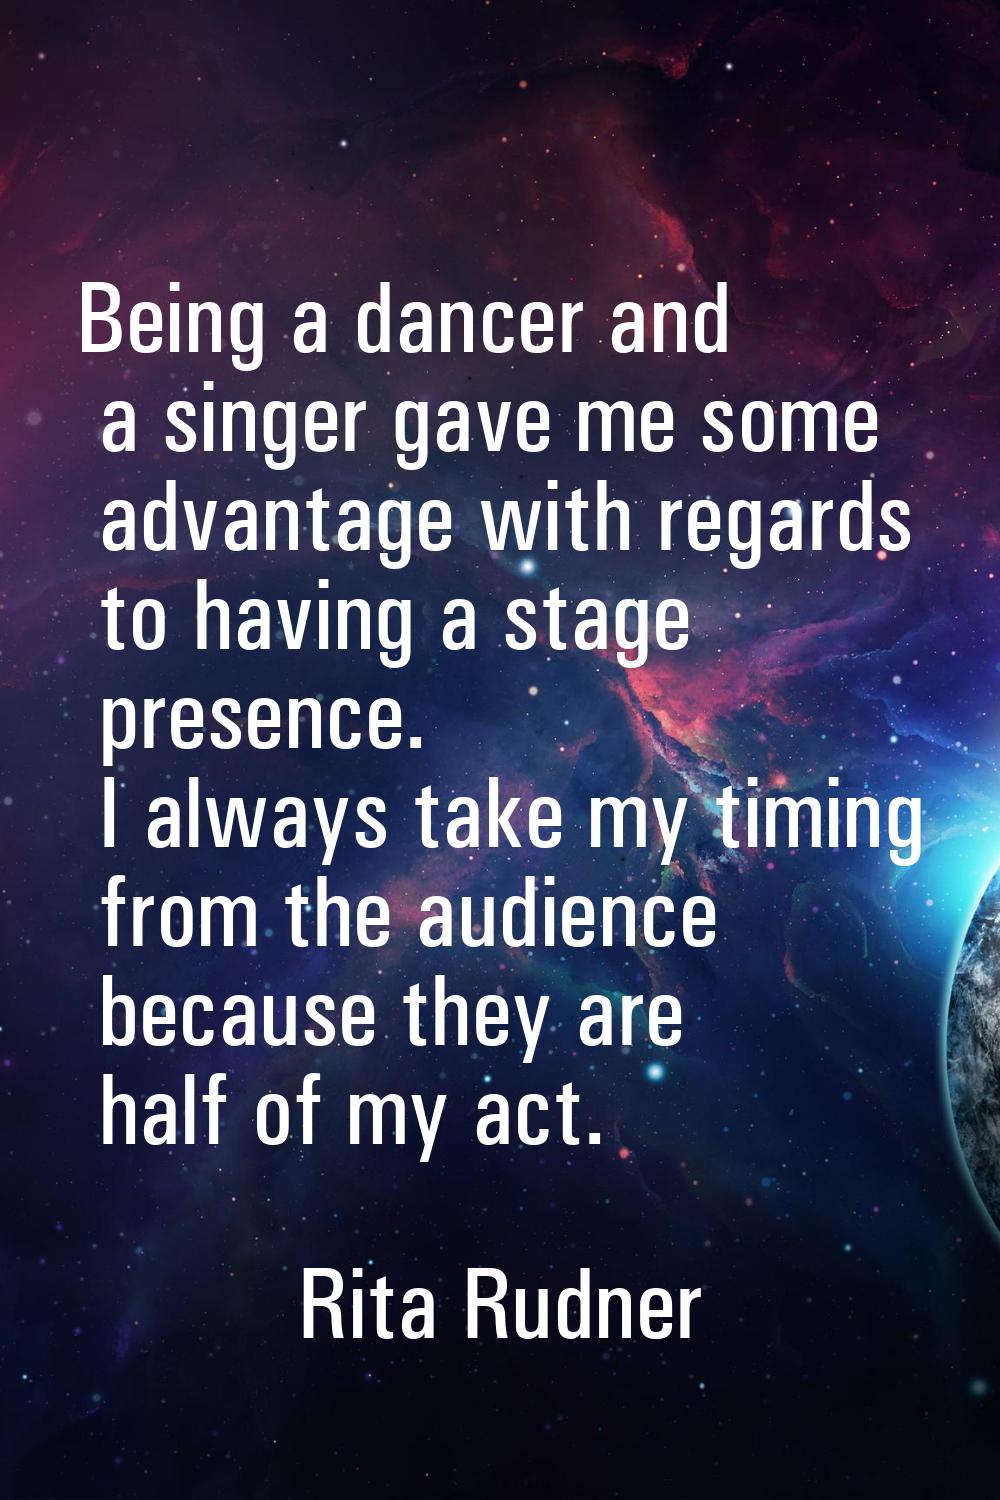 Being a dancer and a singer gave me some advantage with regards to having a stage presence. I alway